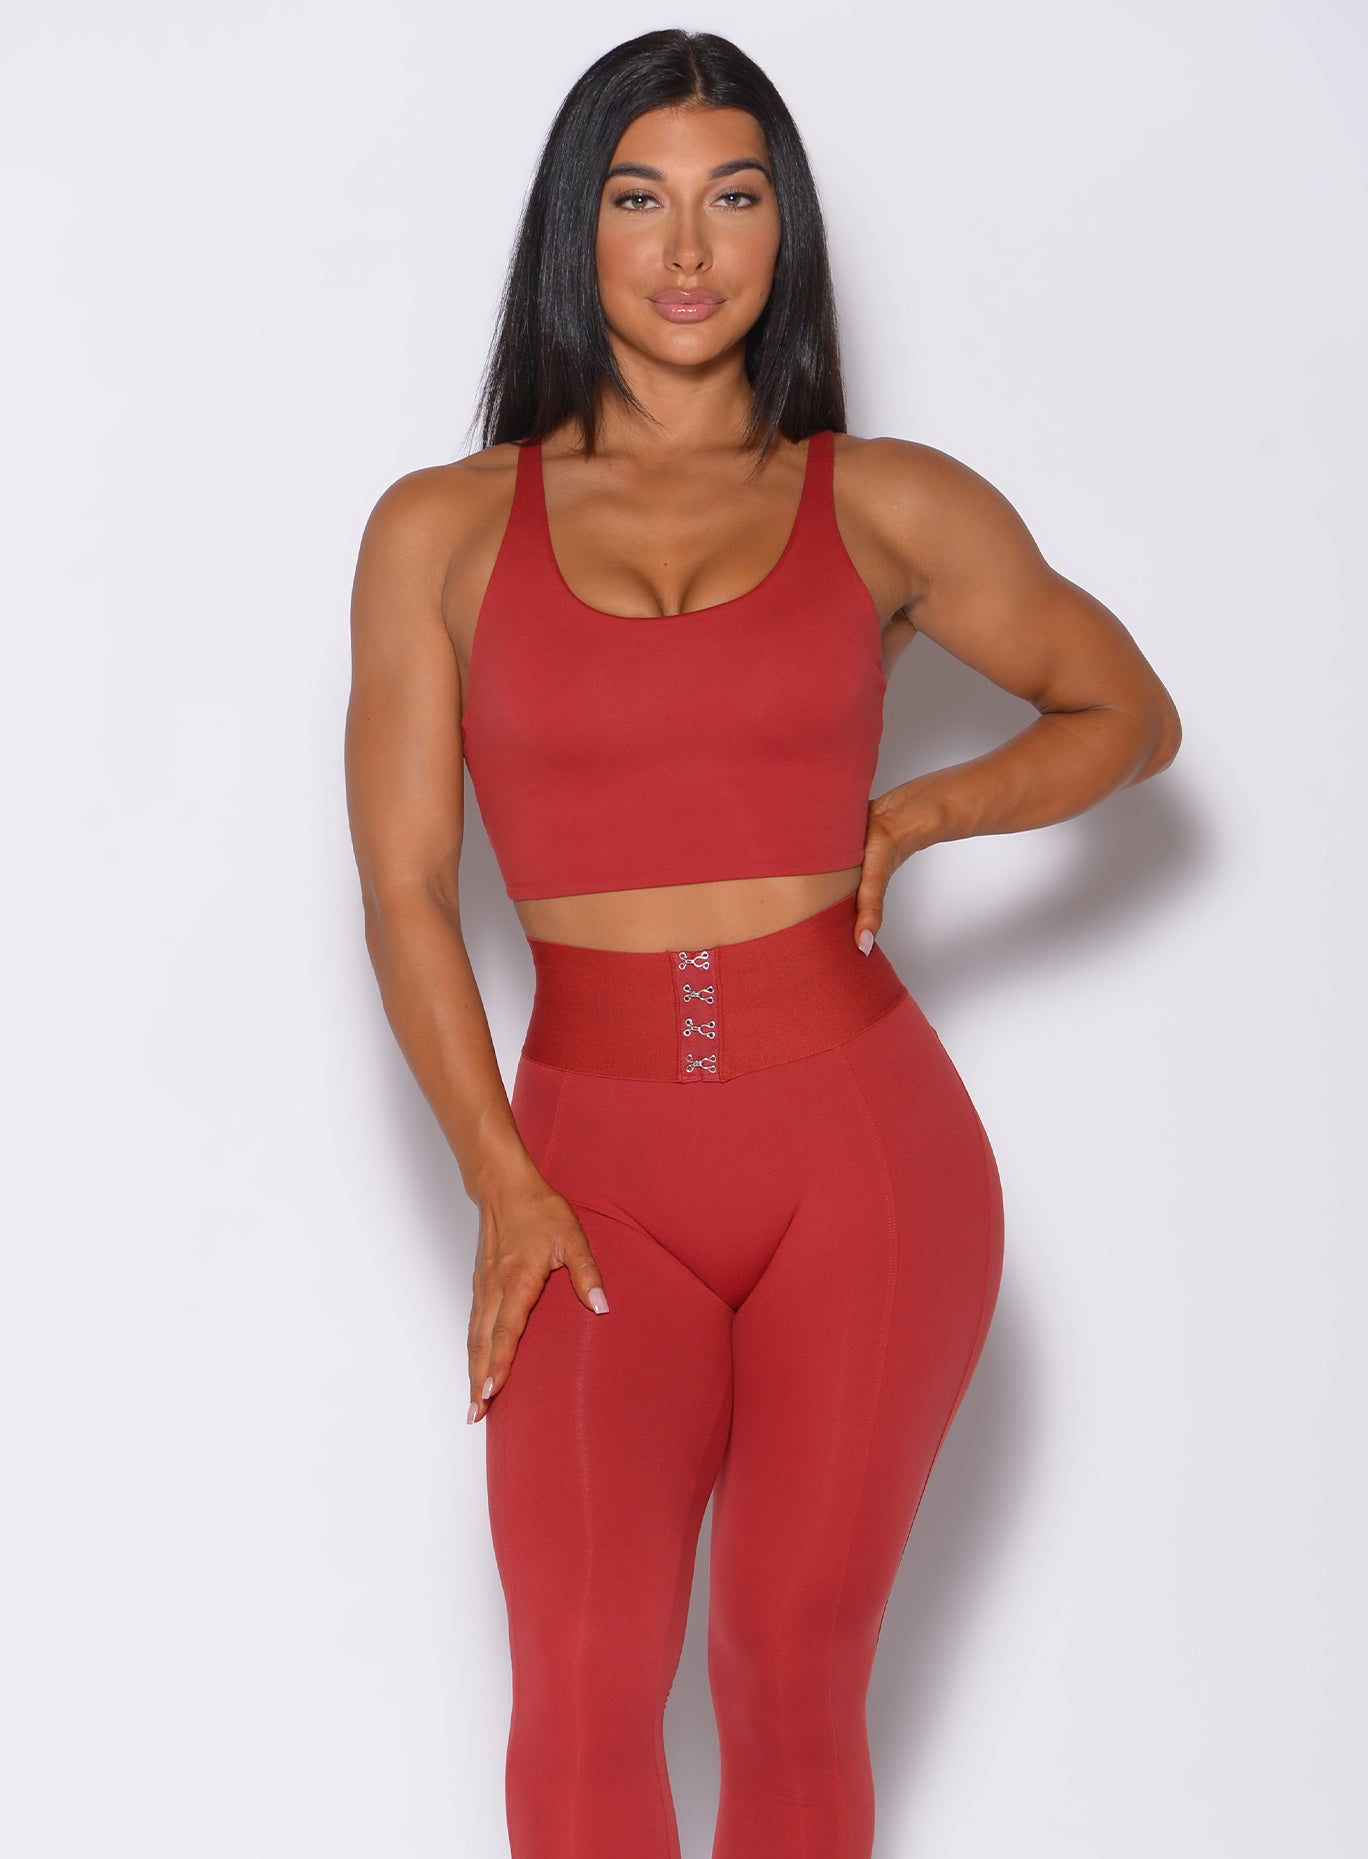 Front profile view of a model facing forward  wearing our impact sports bra in sunset red and a matching leggings